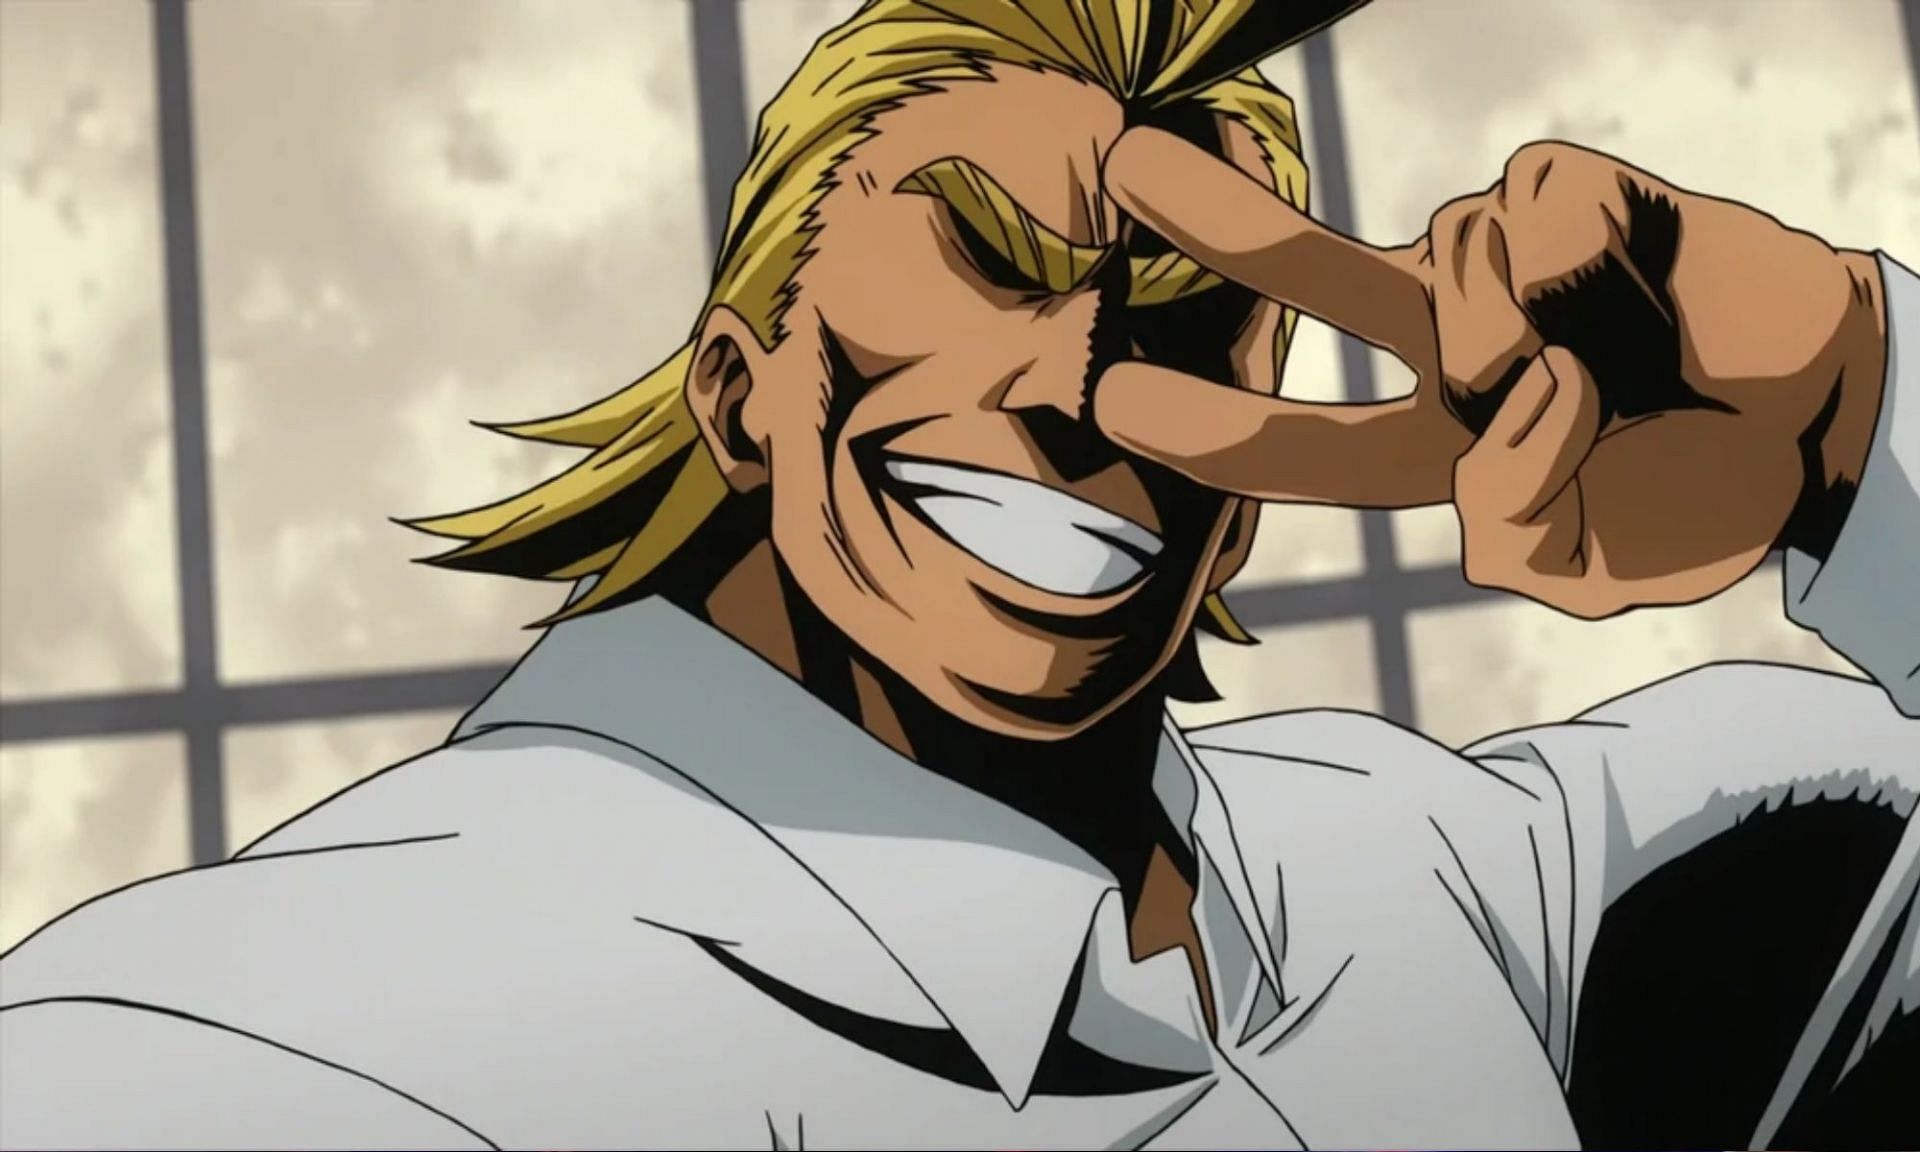 All Might never give up in any situation (Image via Studio Bones)